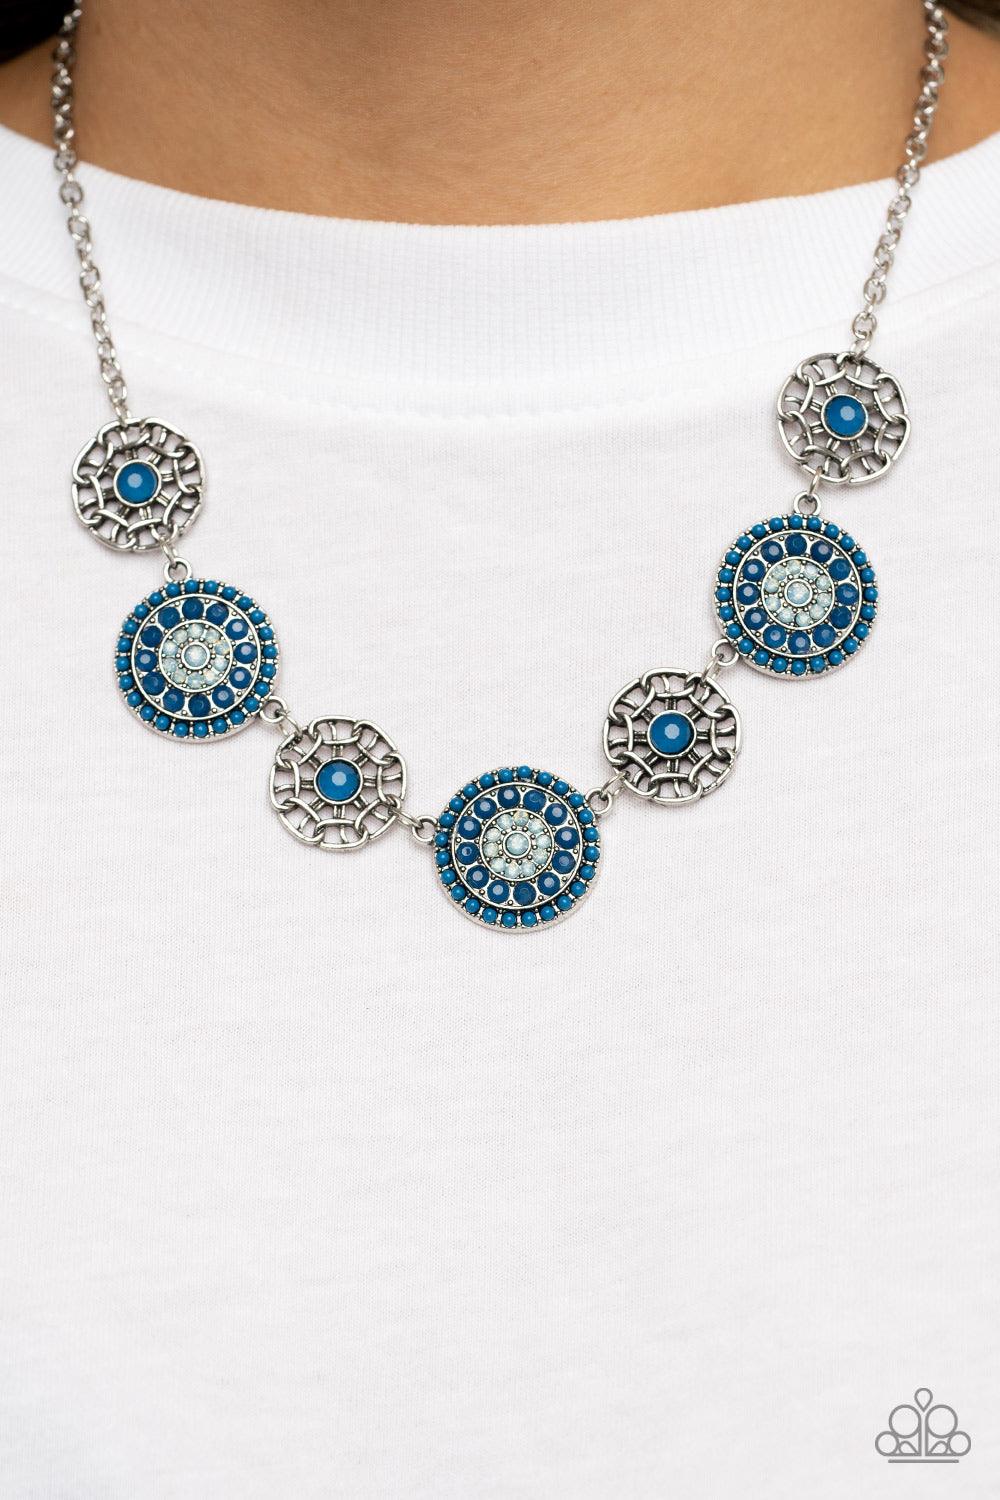 Comet Candy Blue Necklace - Jewelry by Bretta